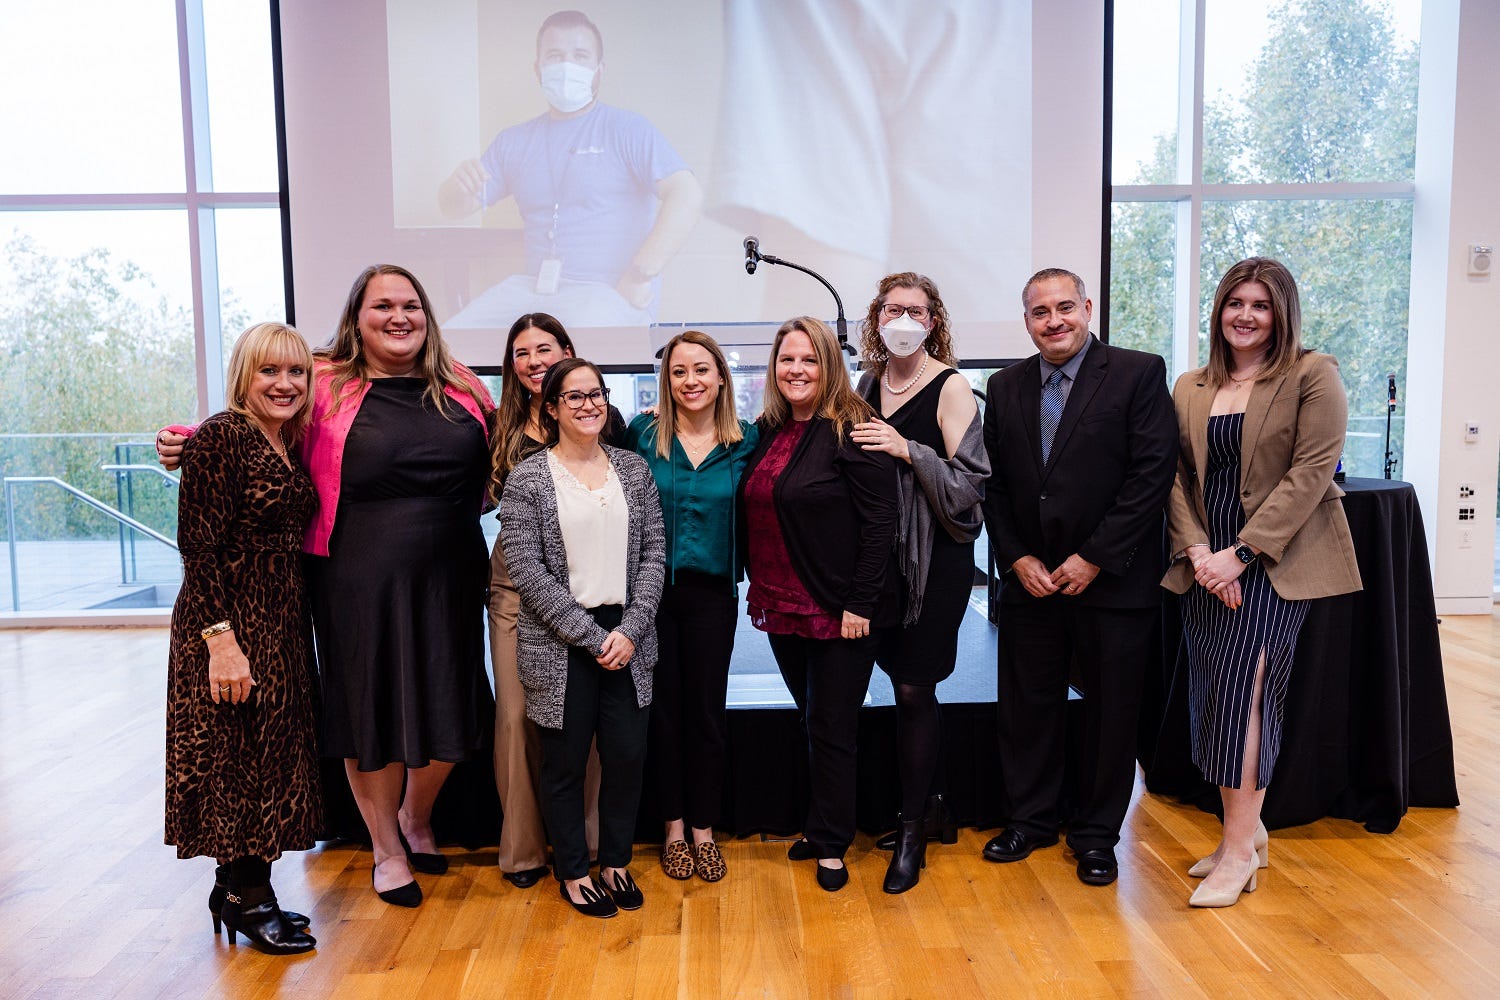 Amanda Lucas, Brianna Murphy, Nicle Hess, Danielle Gerken, Angela Myers, Angel Agner, Dr. Katherine Brownlowe, Matt Onorato and Dr. Laura Williams at the Netcare Foundation’s annual Community Awards & Recognition Dinner, held Oct. 18, 2023, at the Columbus Museum of Art